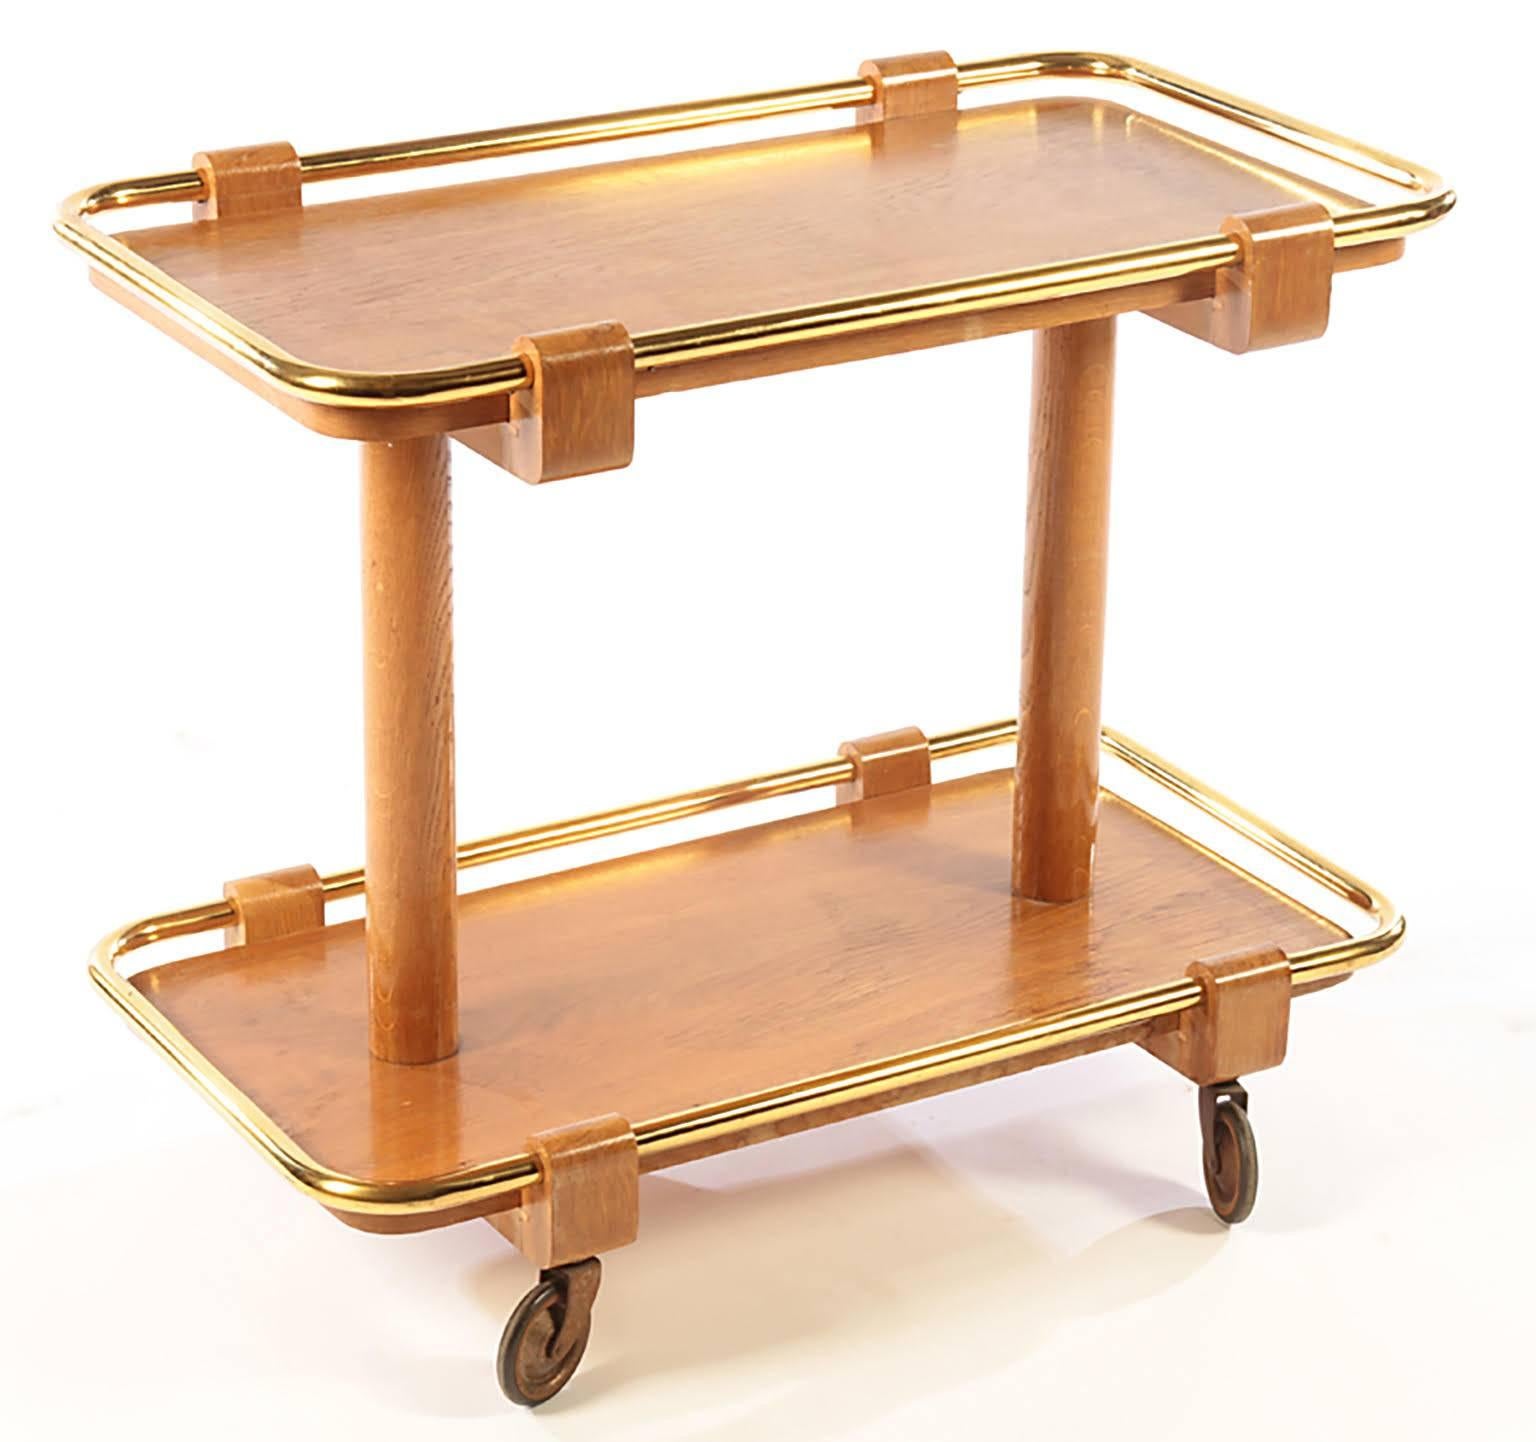 Sculptural Mid-Century Modern walnut and brass two-tiered drinks cart or bar cart.